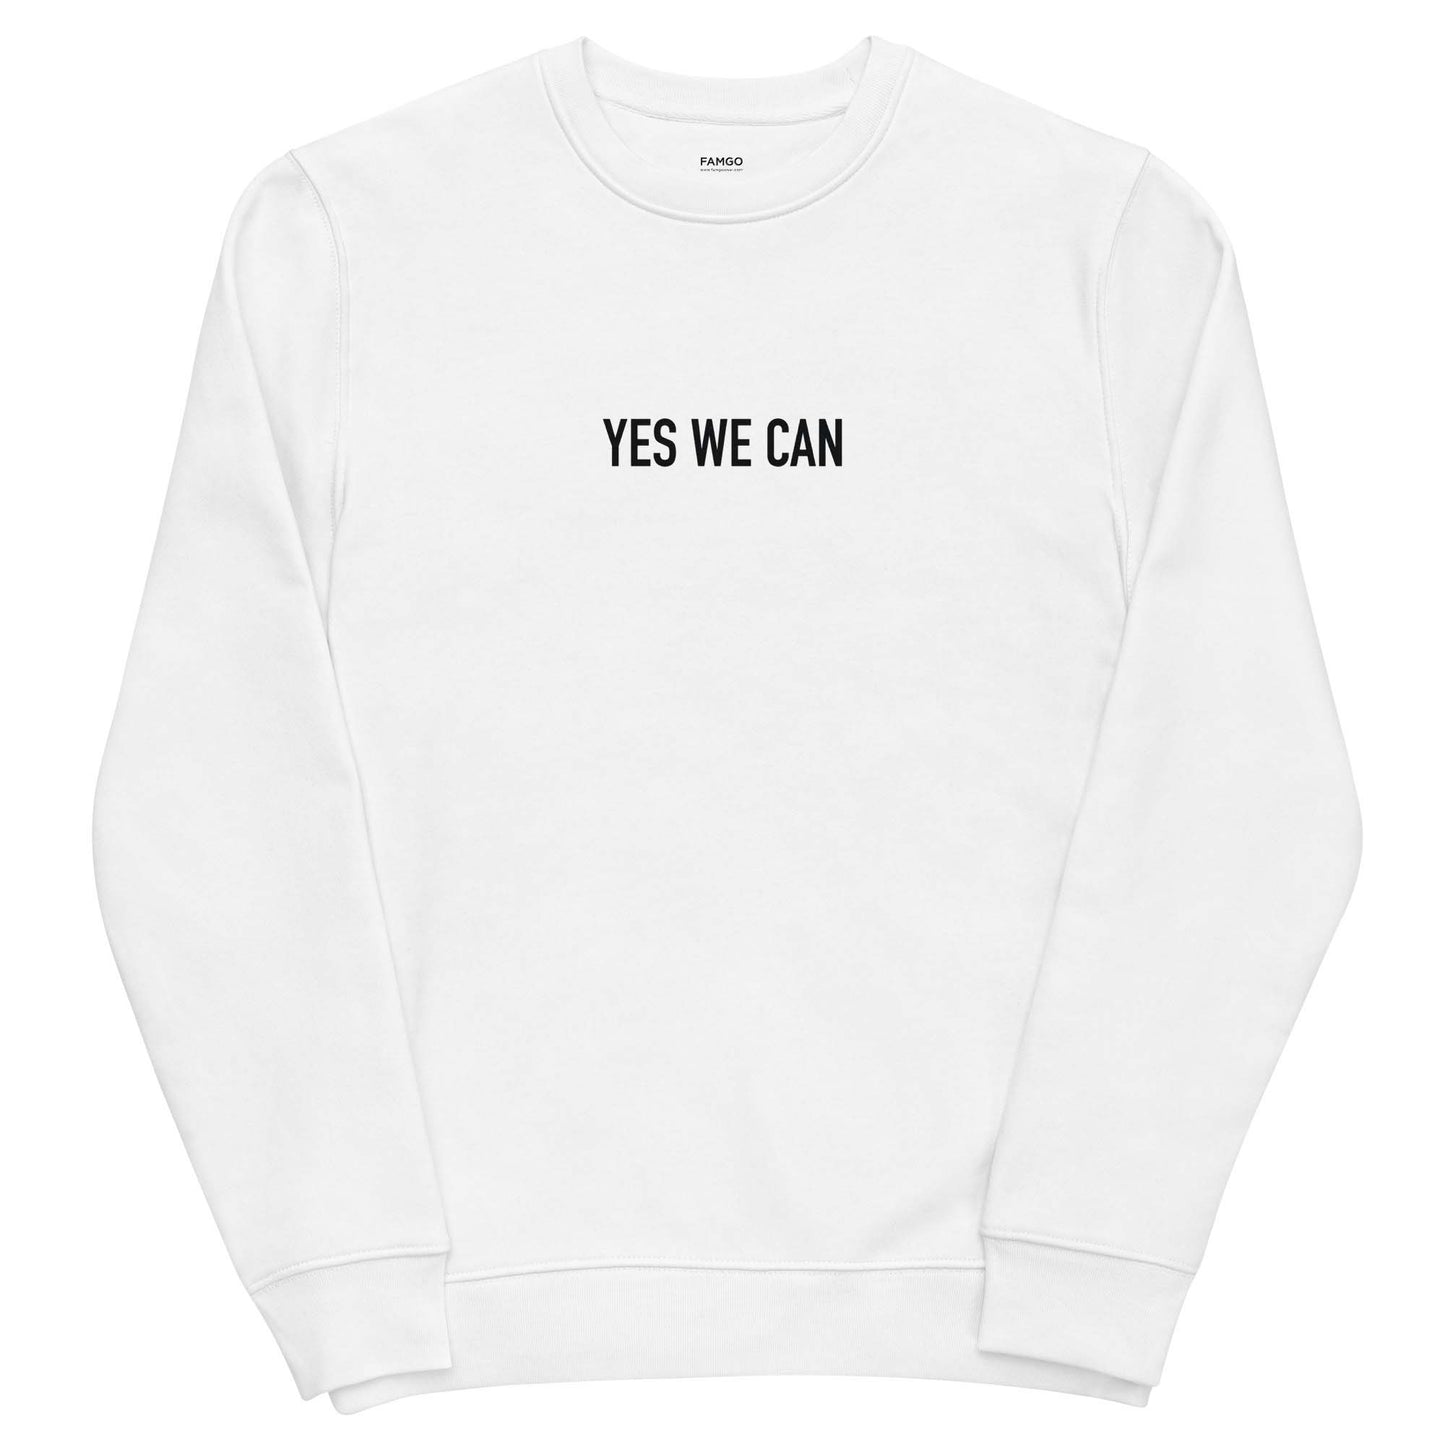 Men white sustainable sweatshirt with Barack Obama's inspirational quote, "Yes We Can."